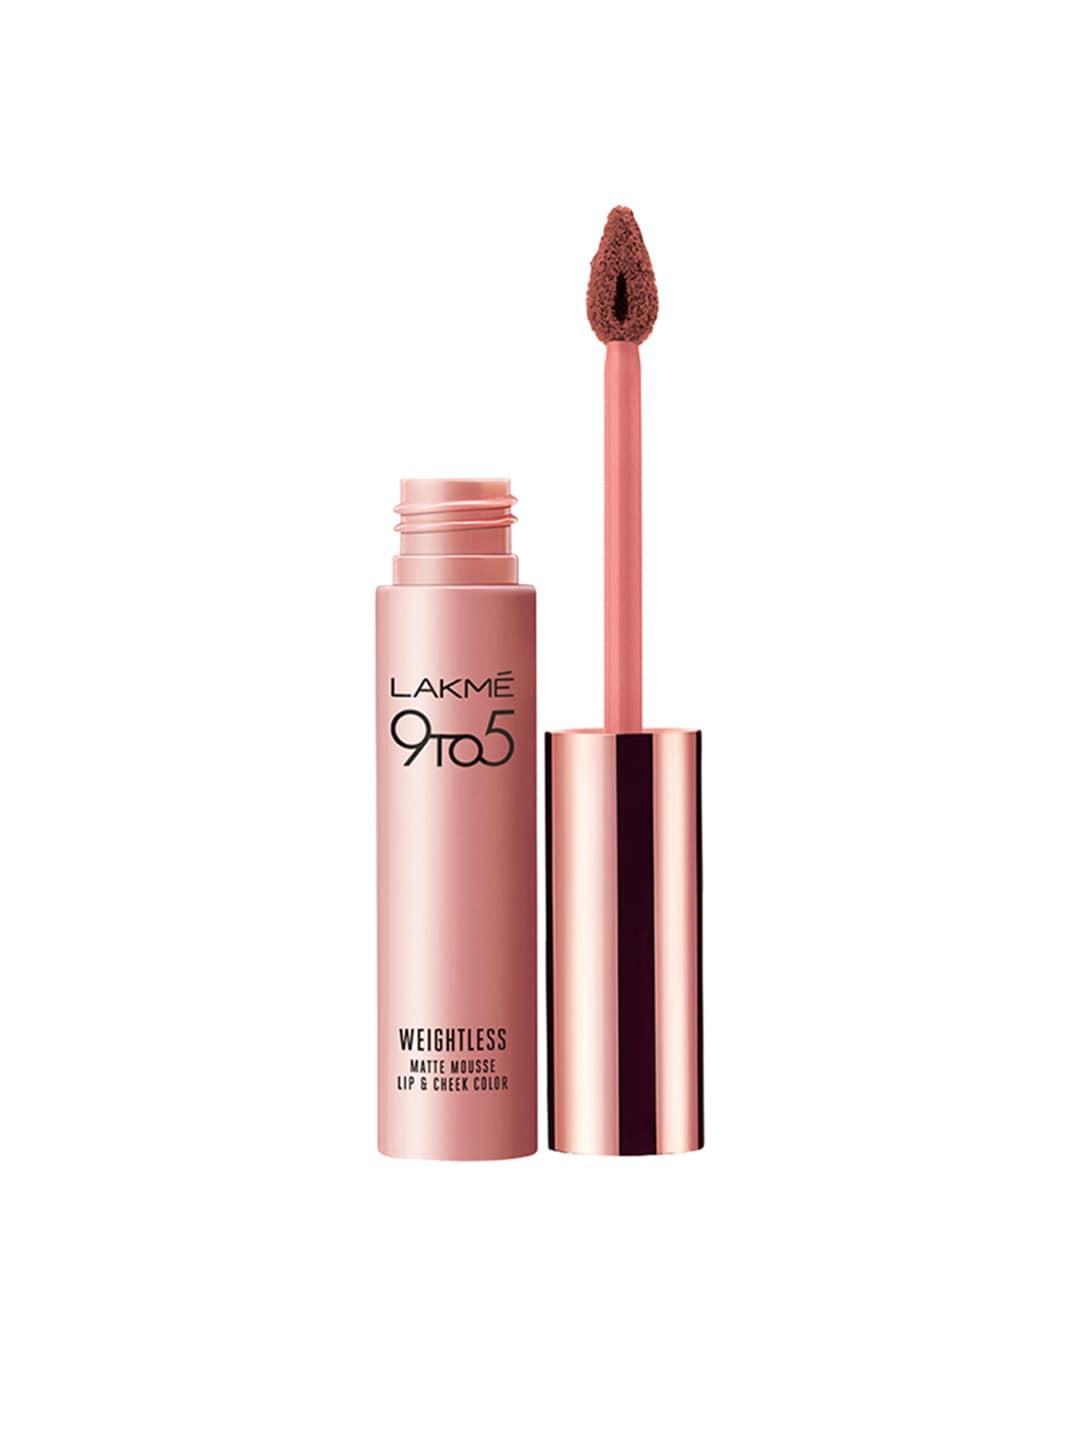 Lakme 9to5 Weightless Matte Mousse Lip & Cheek Color Lipstick - Coffee Lite